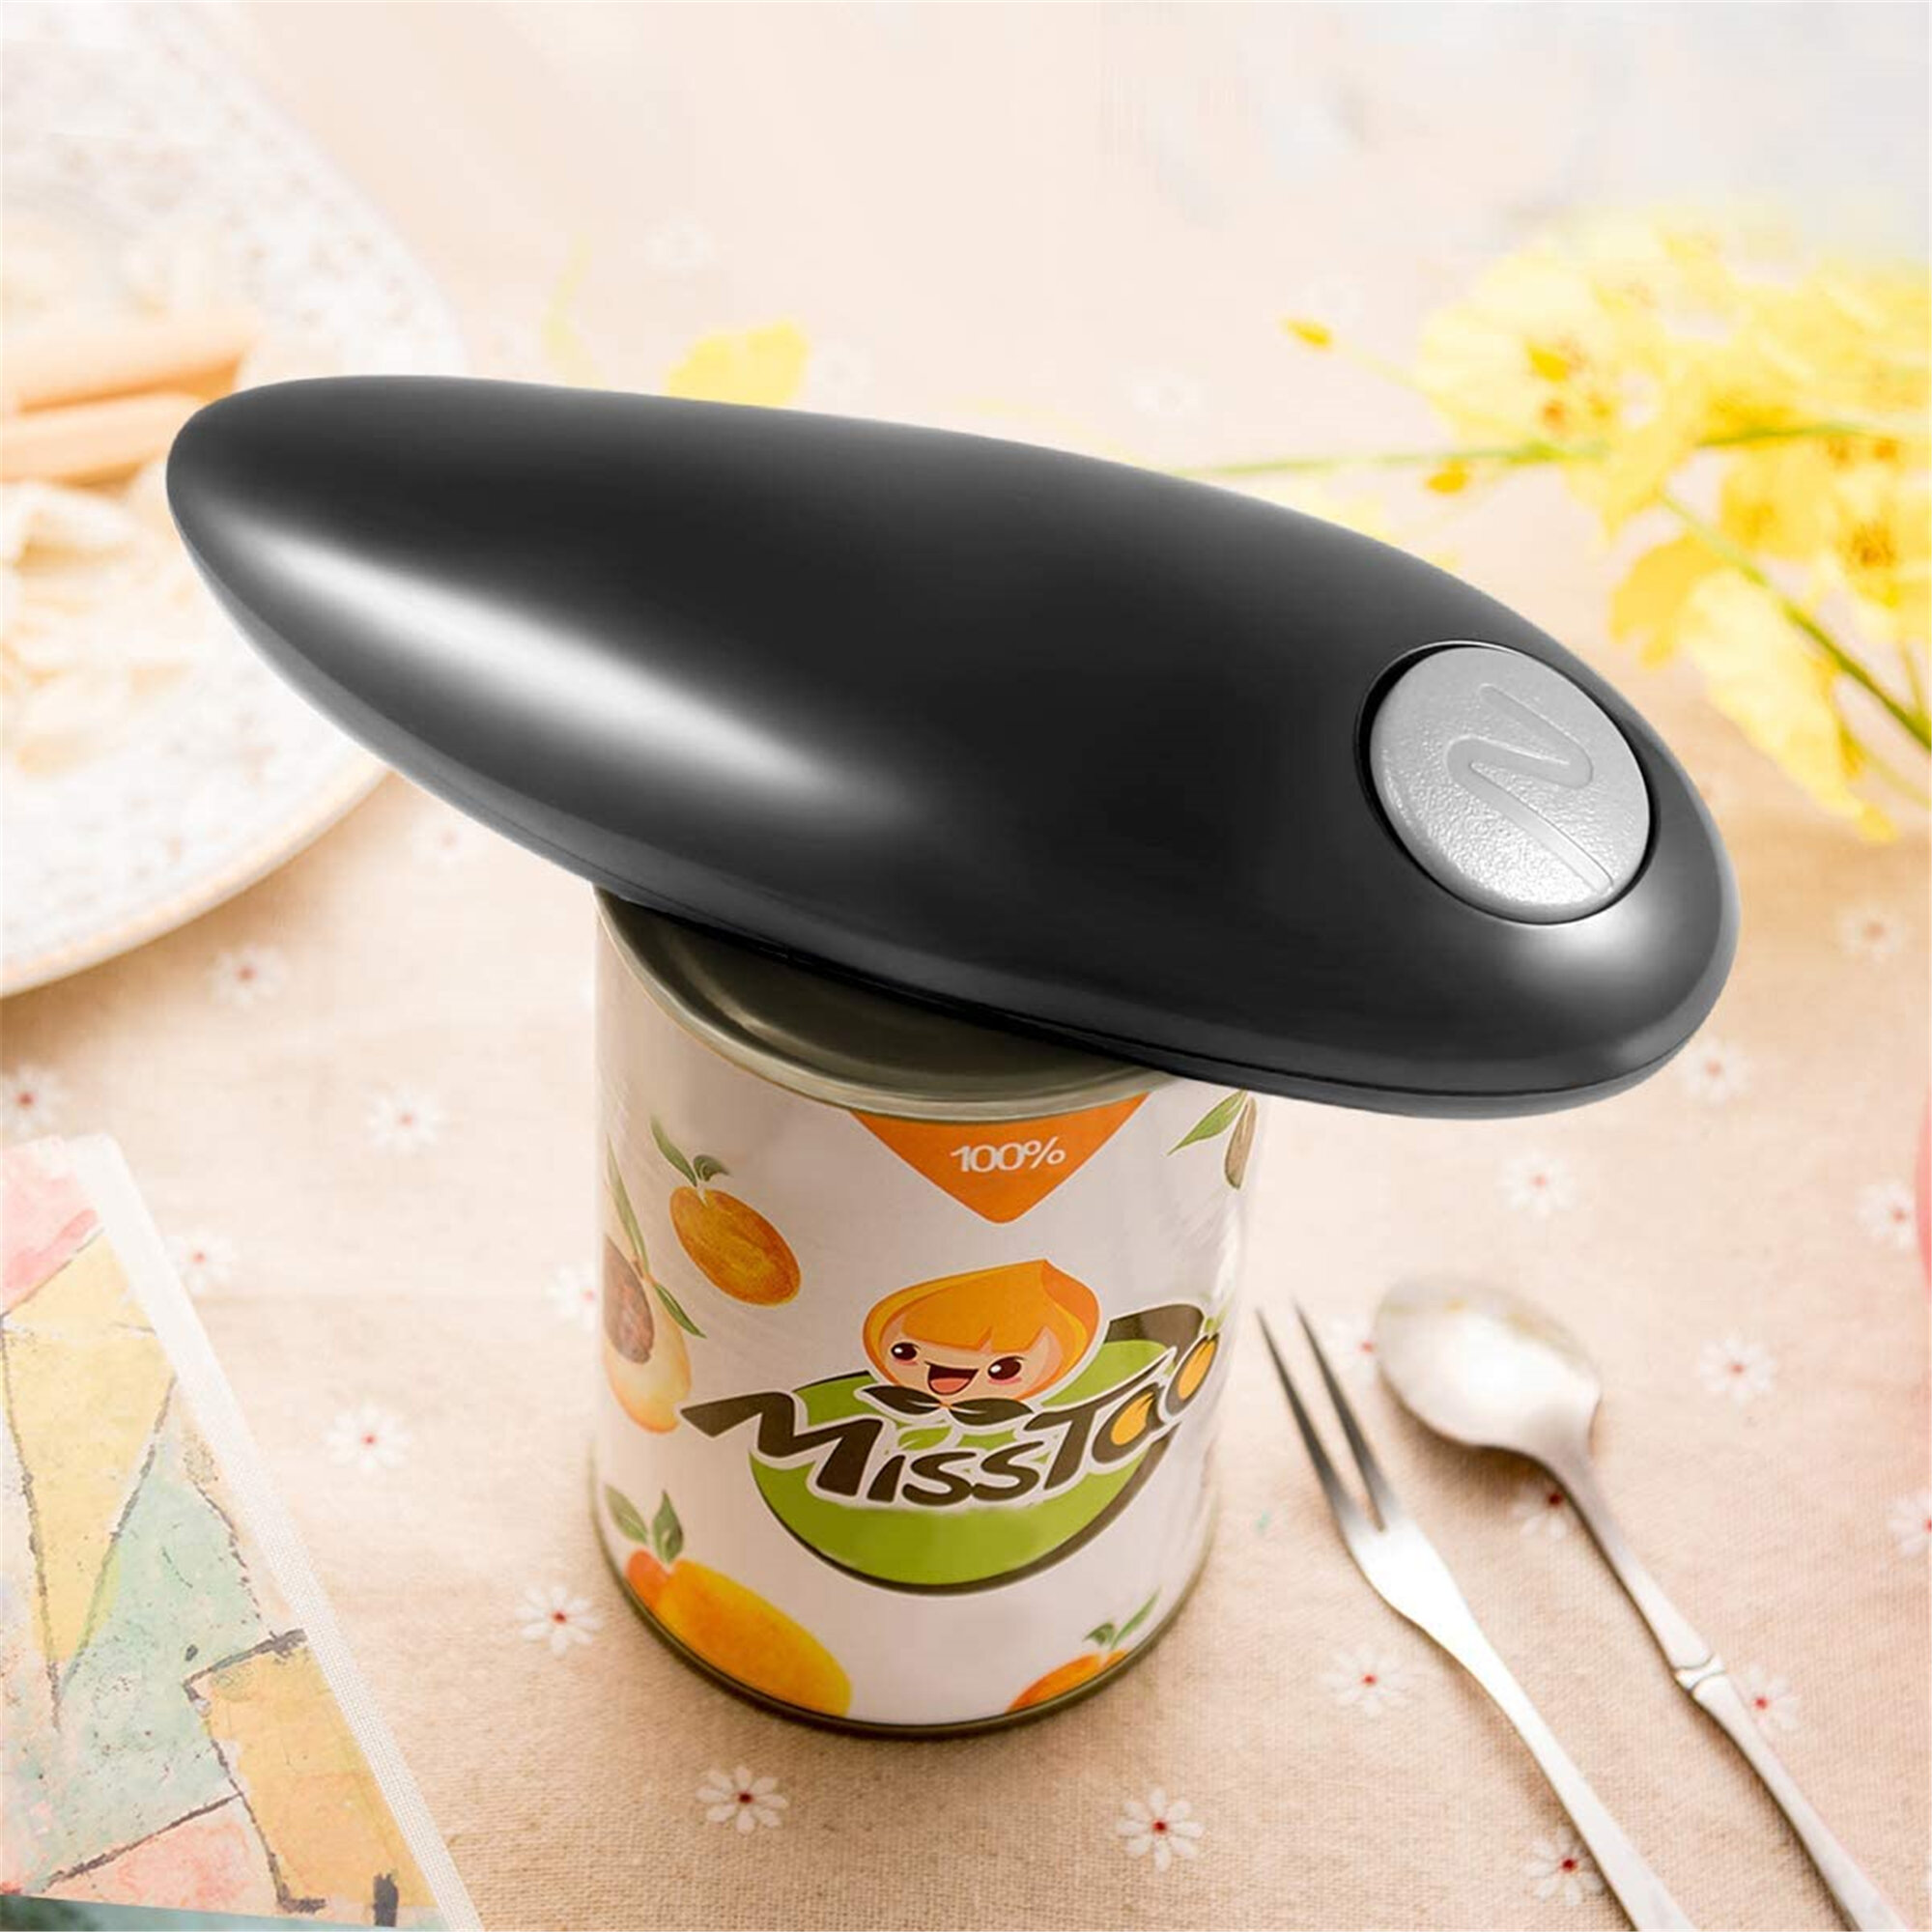 Smooth Edge Automatic Electric Can Opener Restaurant can Opener Chefs Best Choice,Best Kitchen Gadget for Arthritis Electric Can Opener